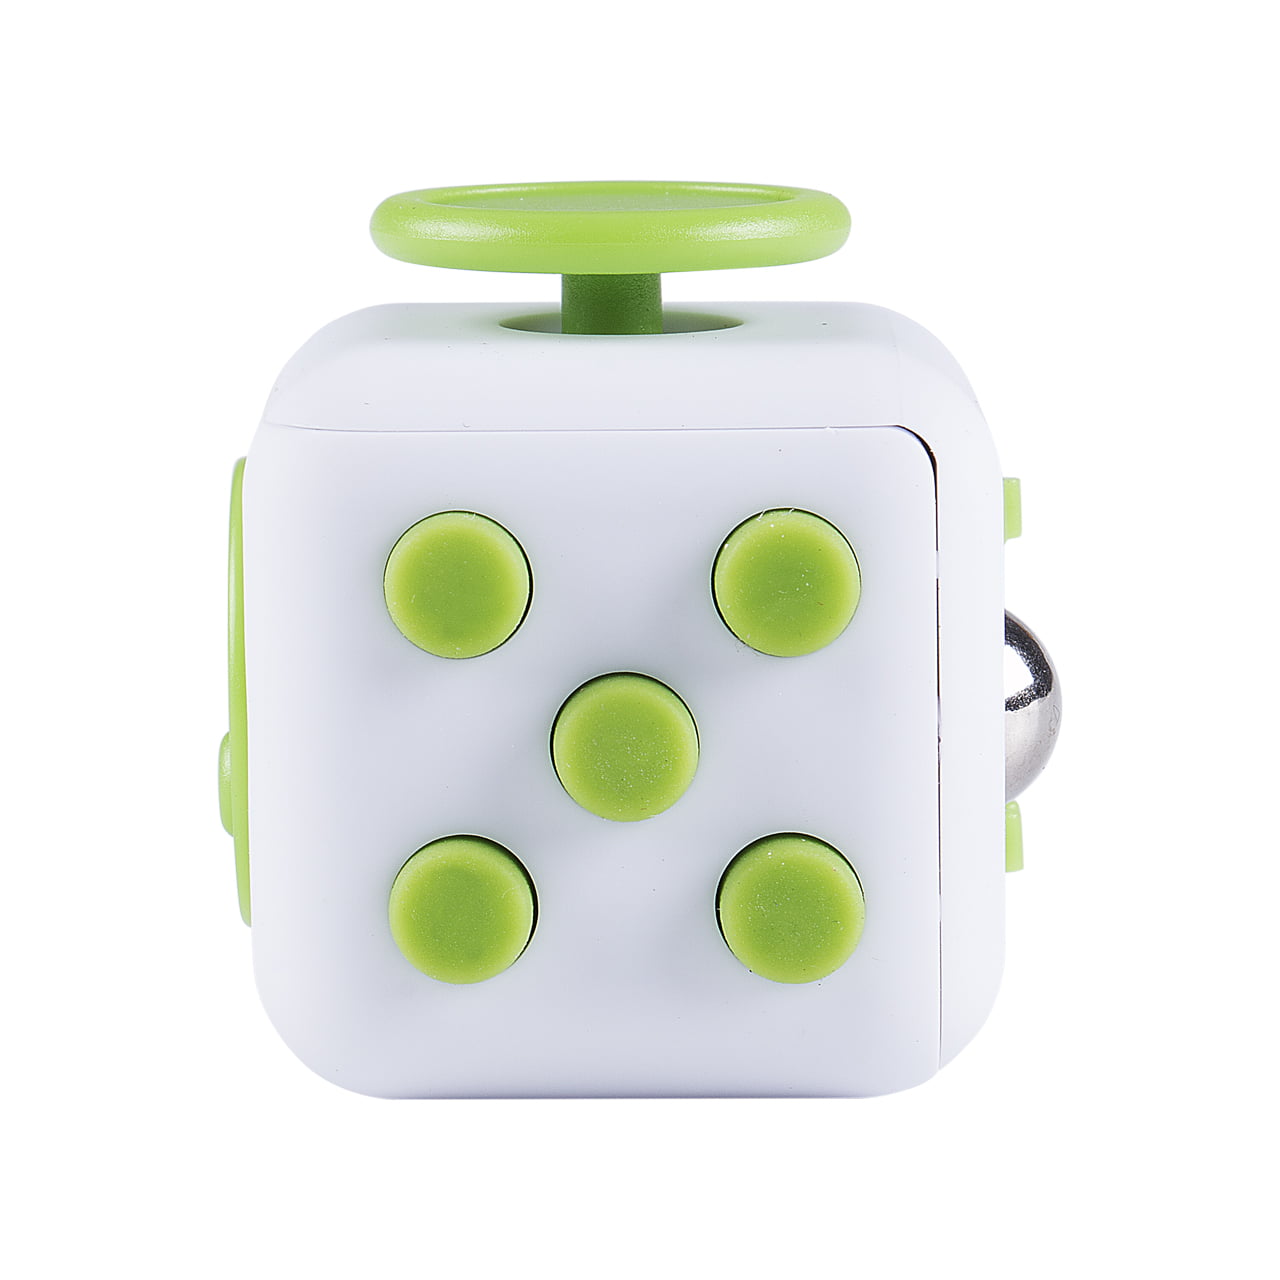 Fidget Cube Anxiety Stress Relief Focus 6-side Calm Funny Finger Toy Kids&Adults 